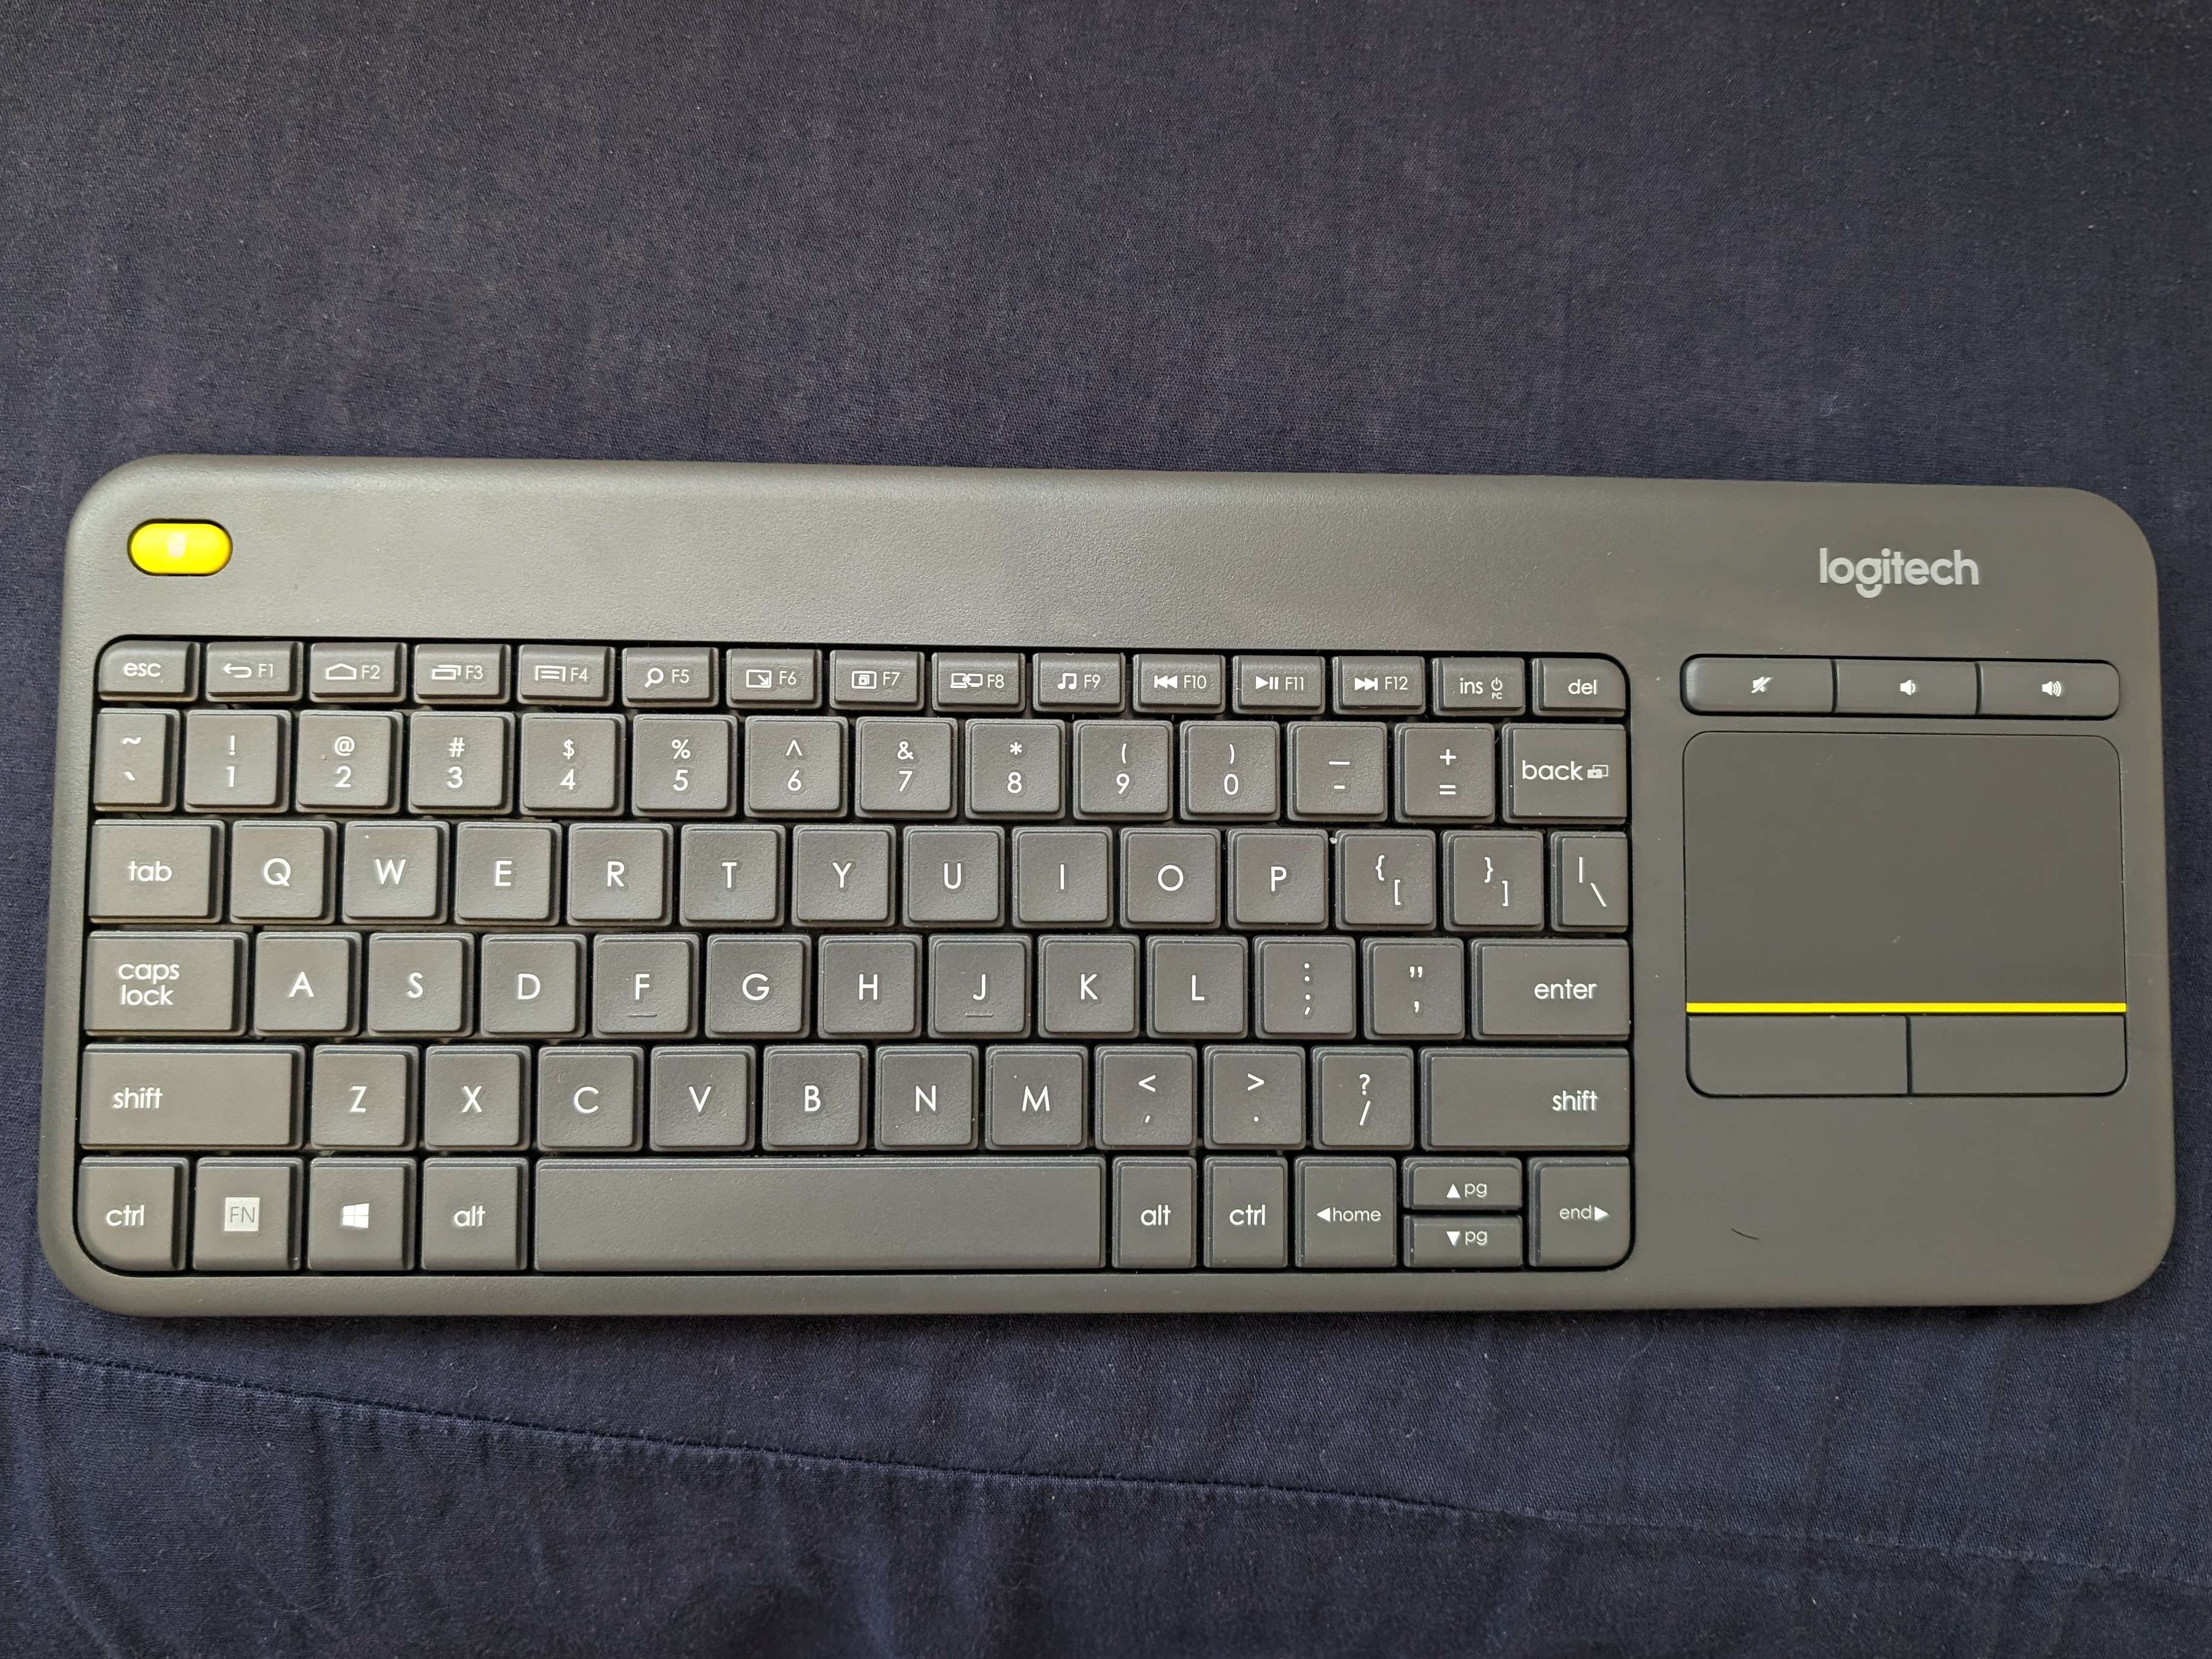 The Logitech K400 Plus on top of pillow.